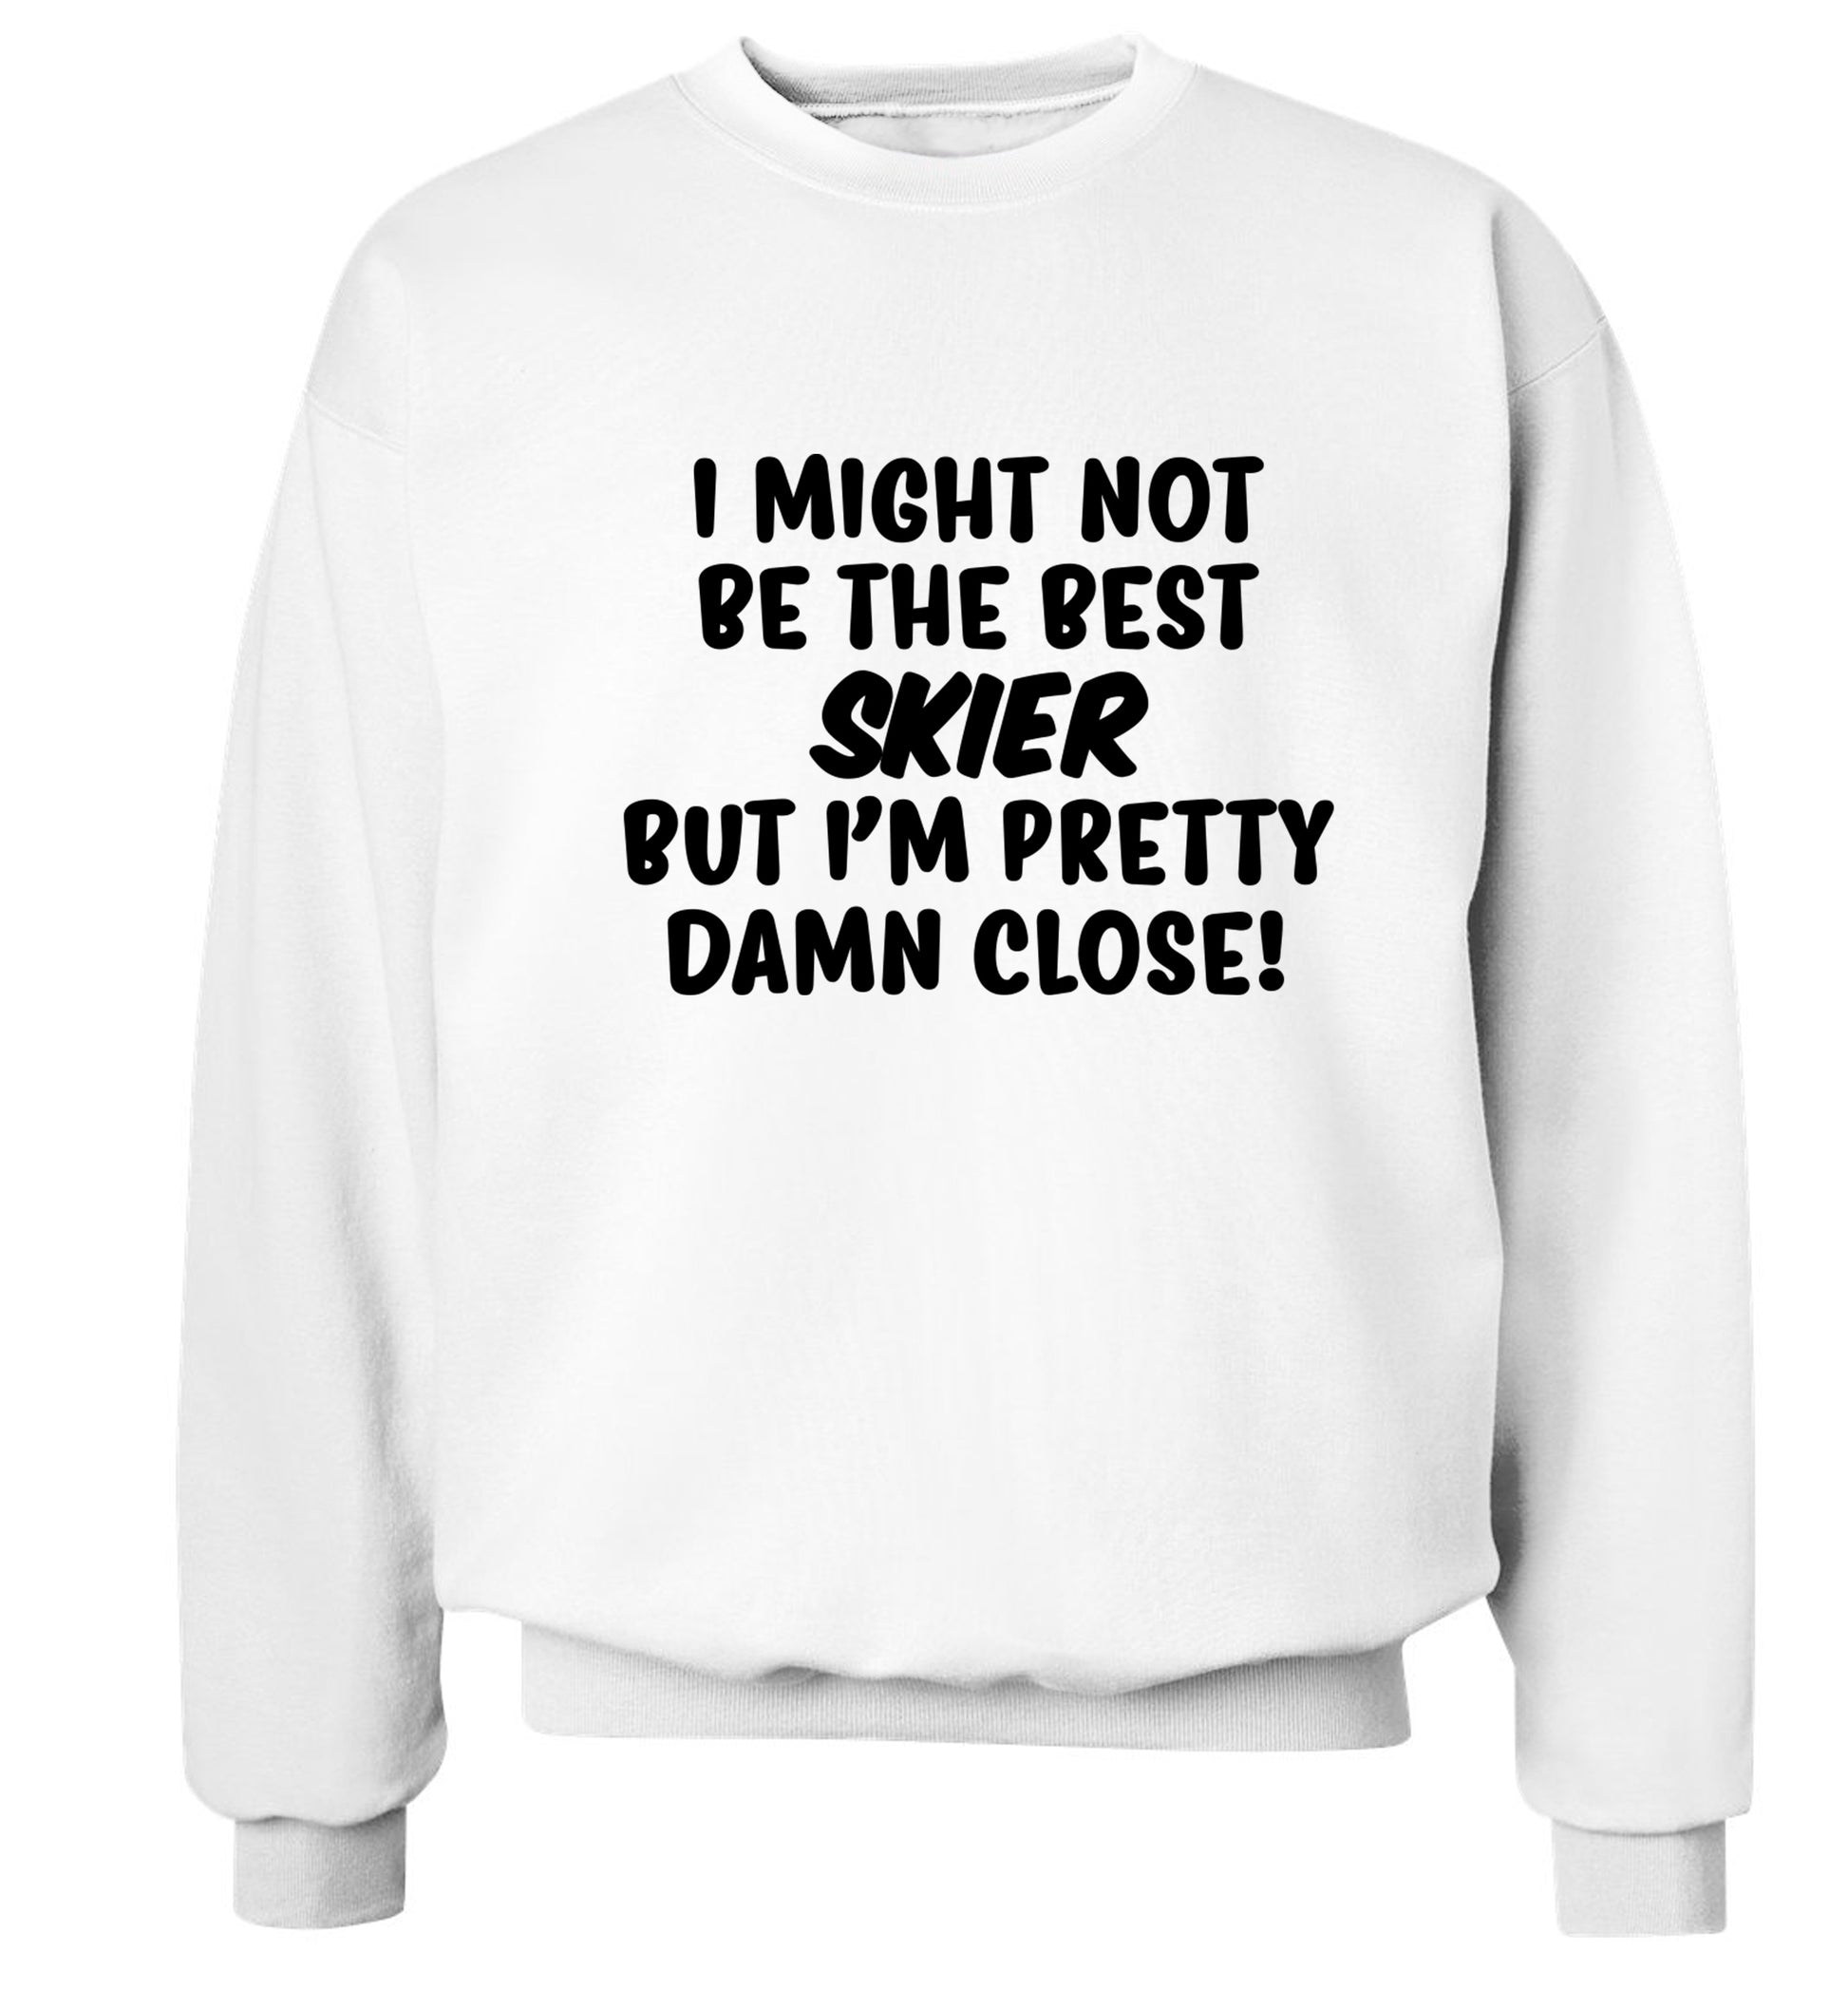 I might not be the best skier but I'm pretty damn close! Adult's unisexwhite Sweater 2XL